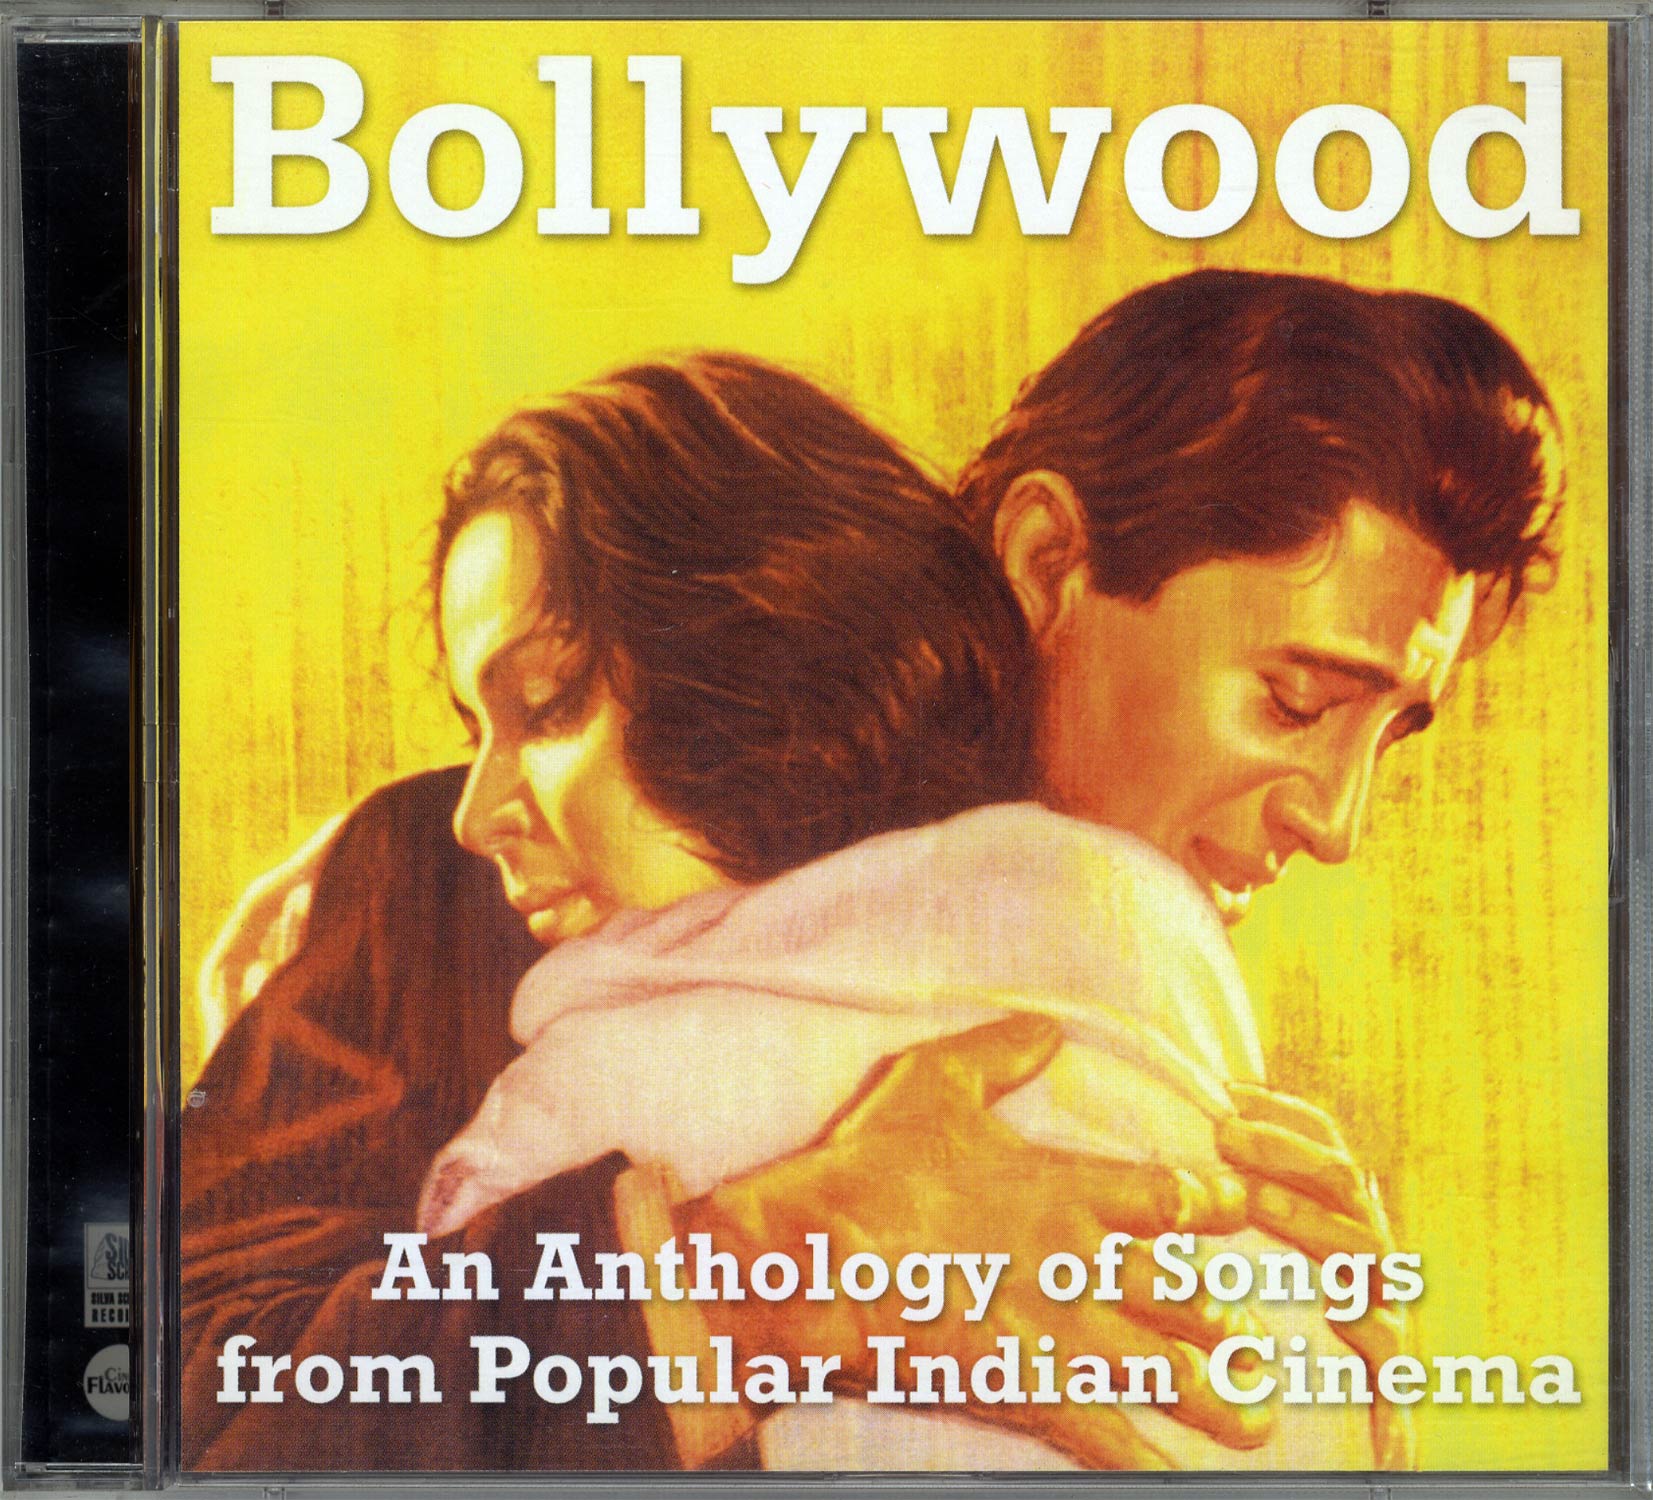 Bollywood　An Anthology of Songs from Popular Indian Cinema